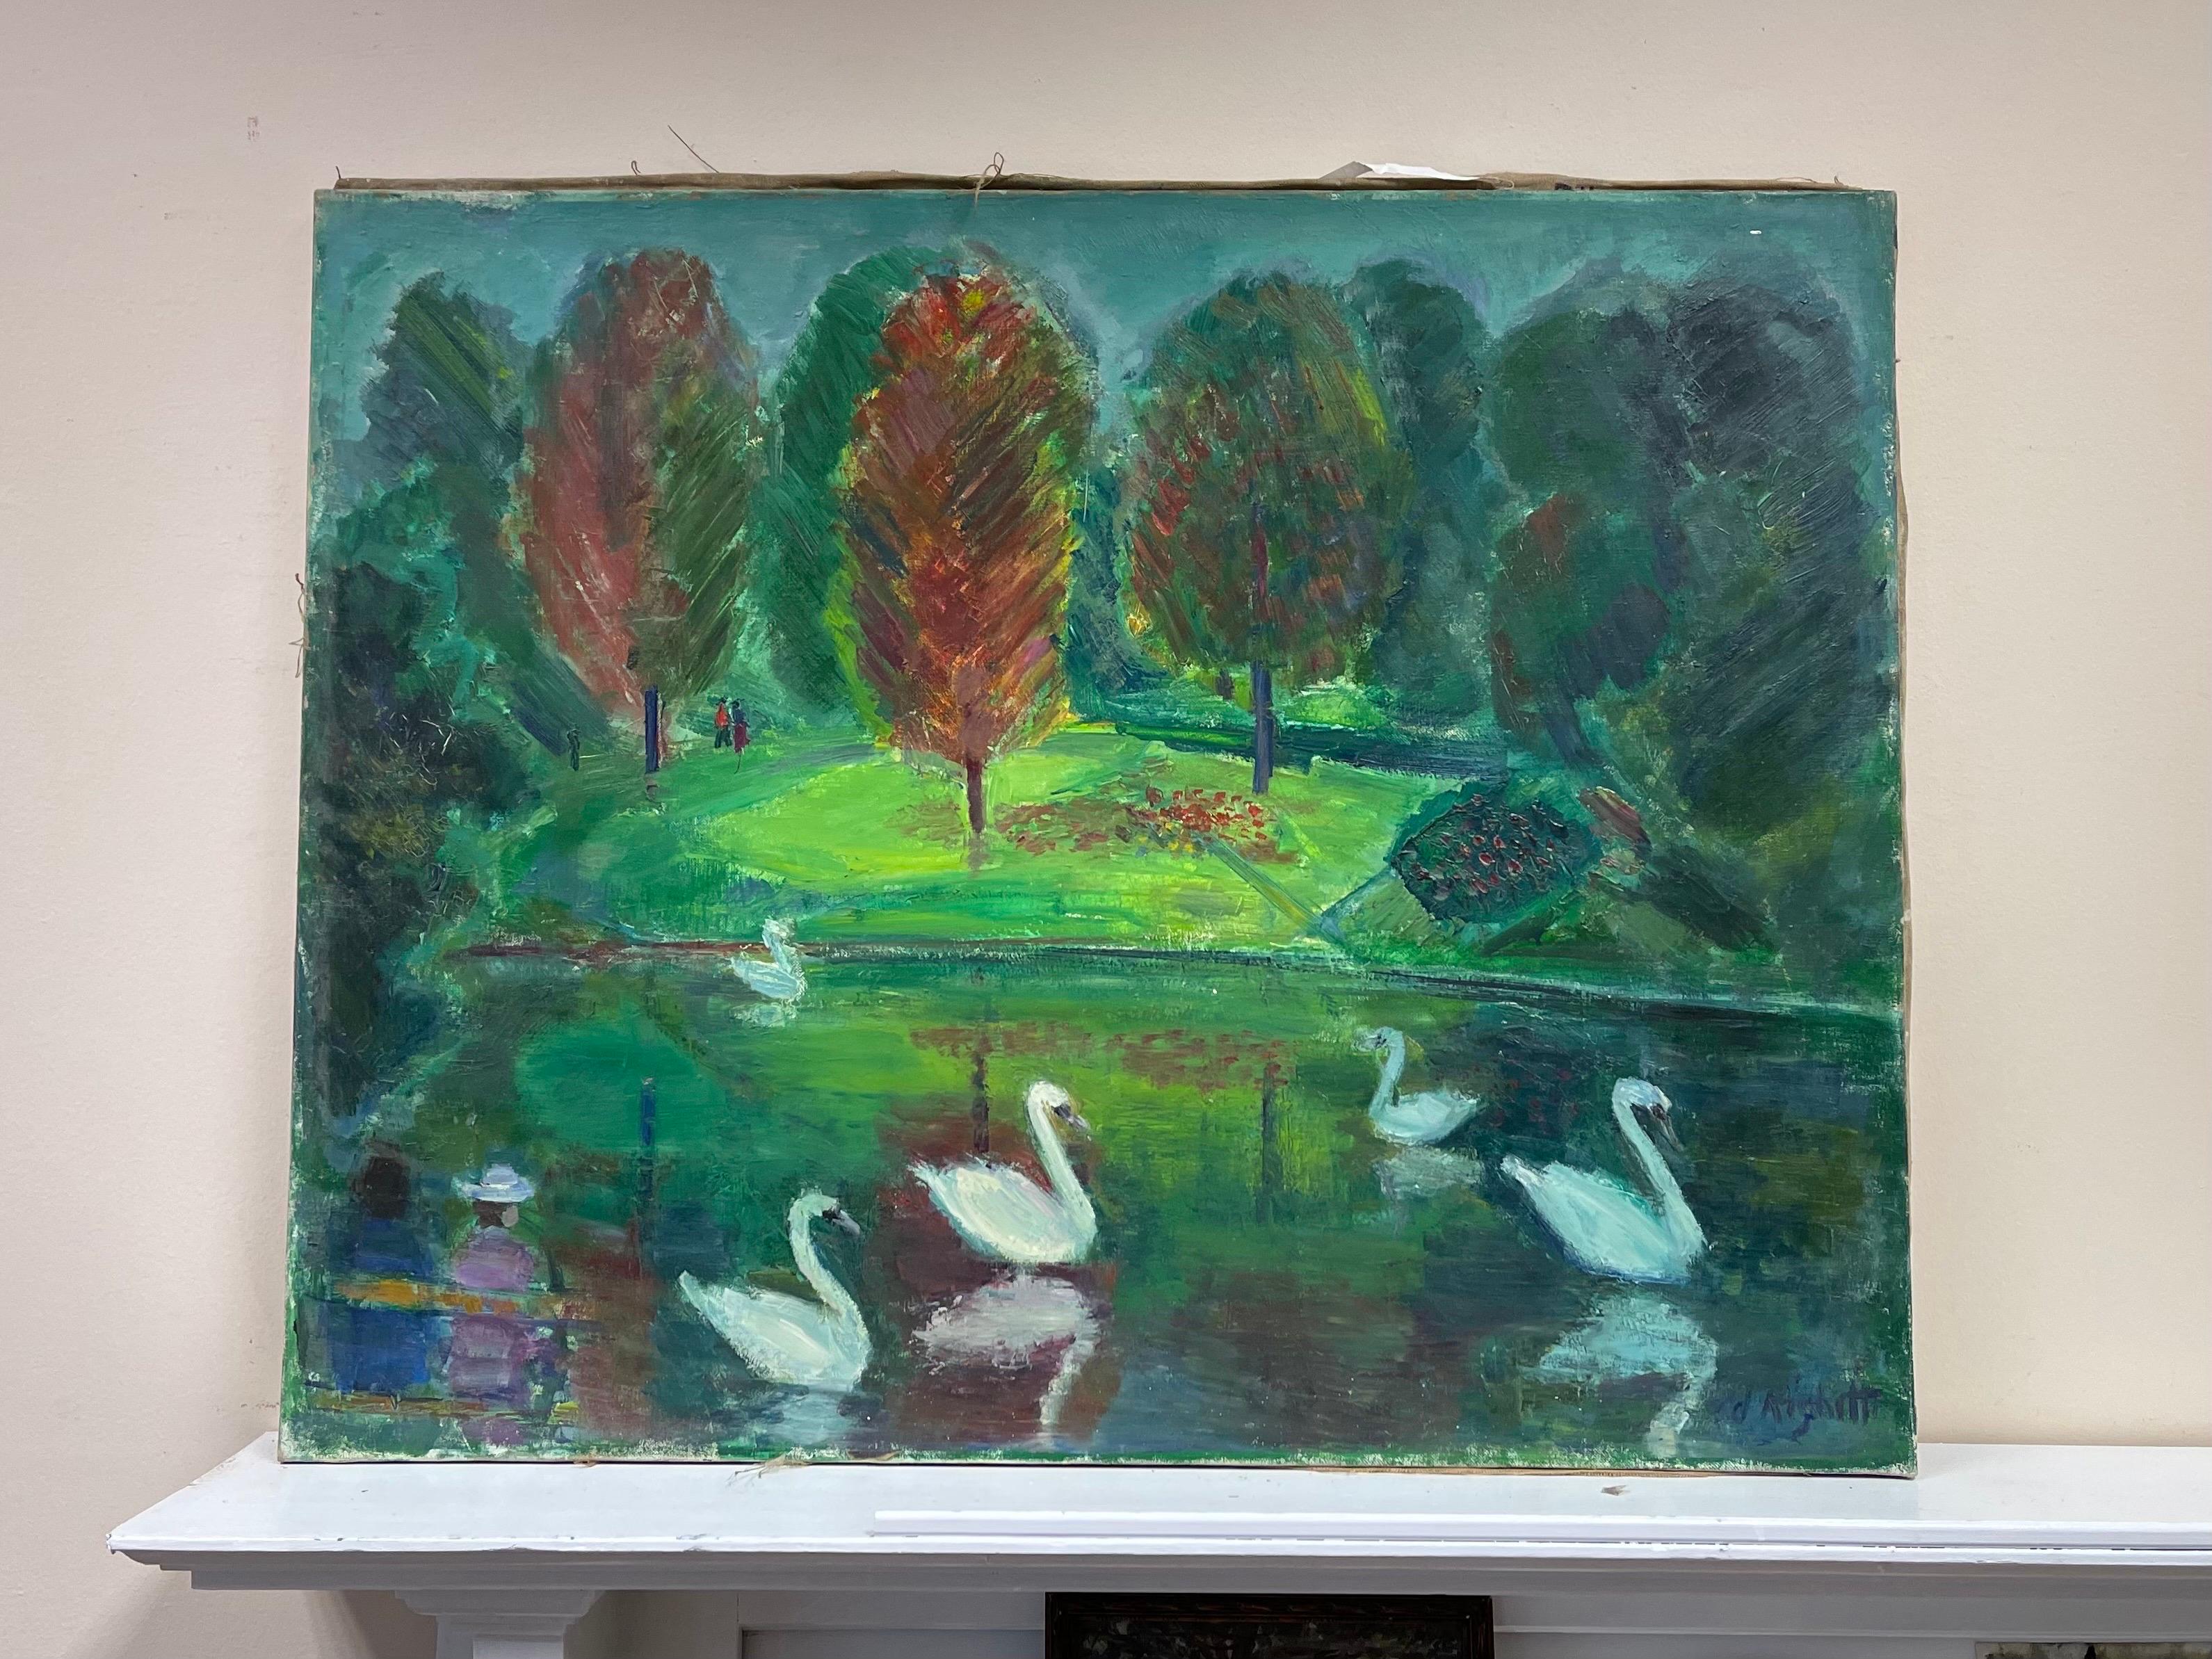 Original French Mid Century Oil - Vibrant Green Lake With Elegant Swans - Painting by Édouard Righetti (1924-2001)